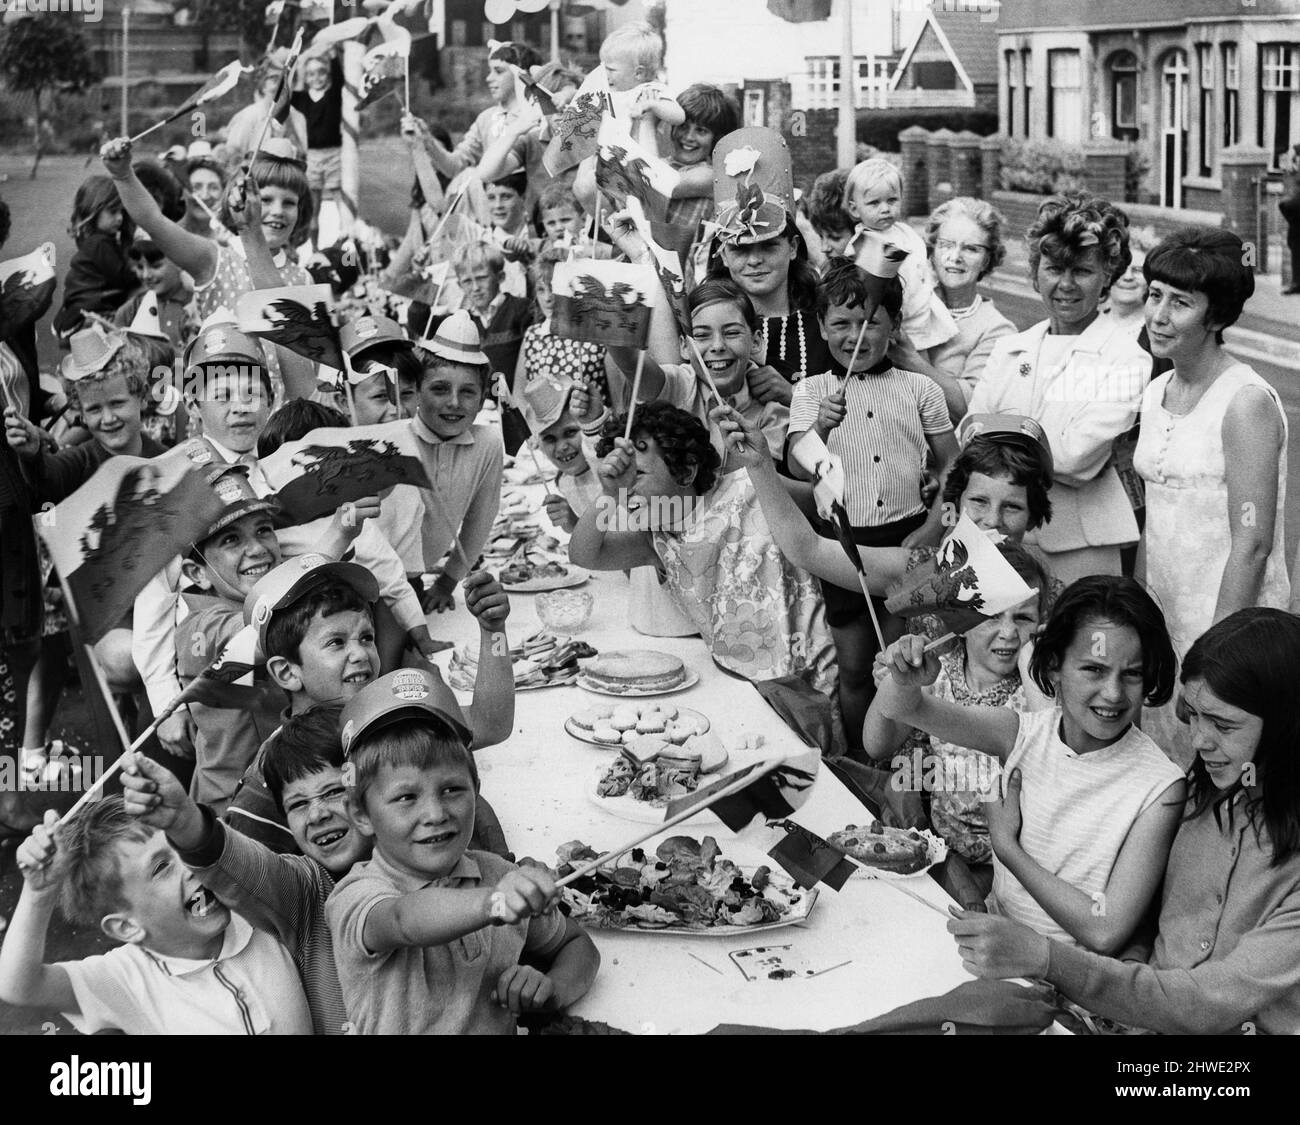 A street party for the Investiture of Prince Charles. Abercynon Street, Grangetown, Cardiff, Wales. 1st July 1969. Stock Photo